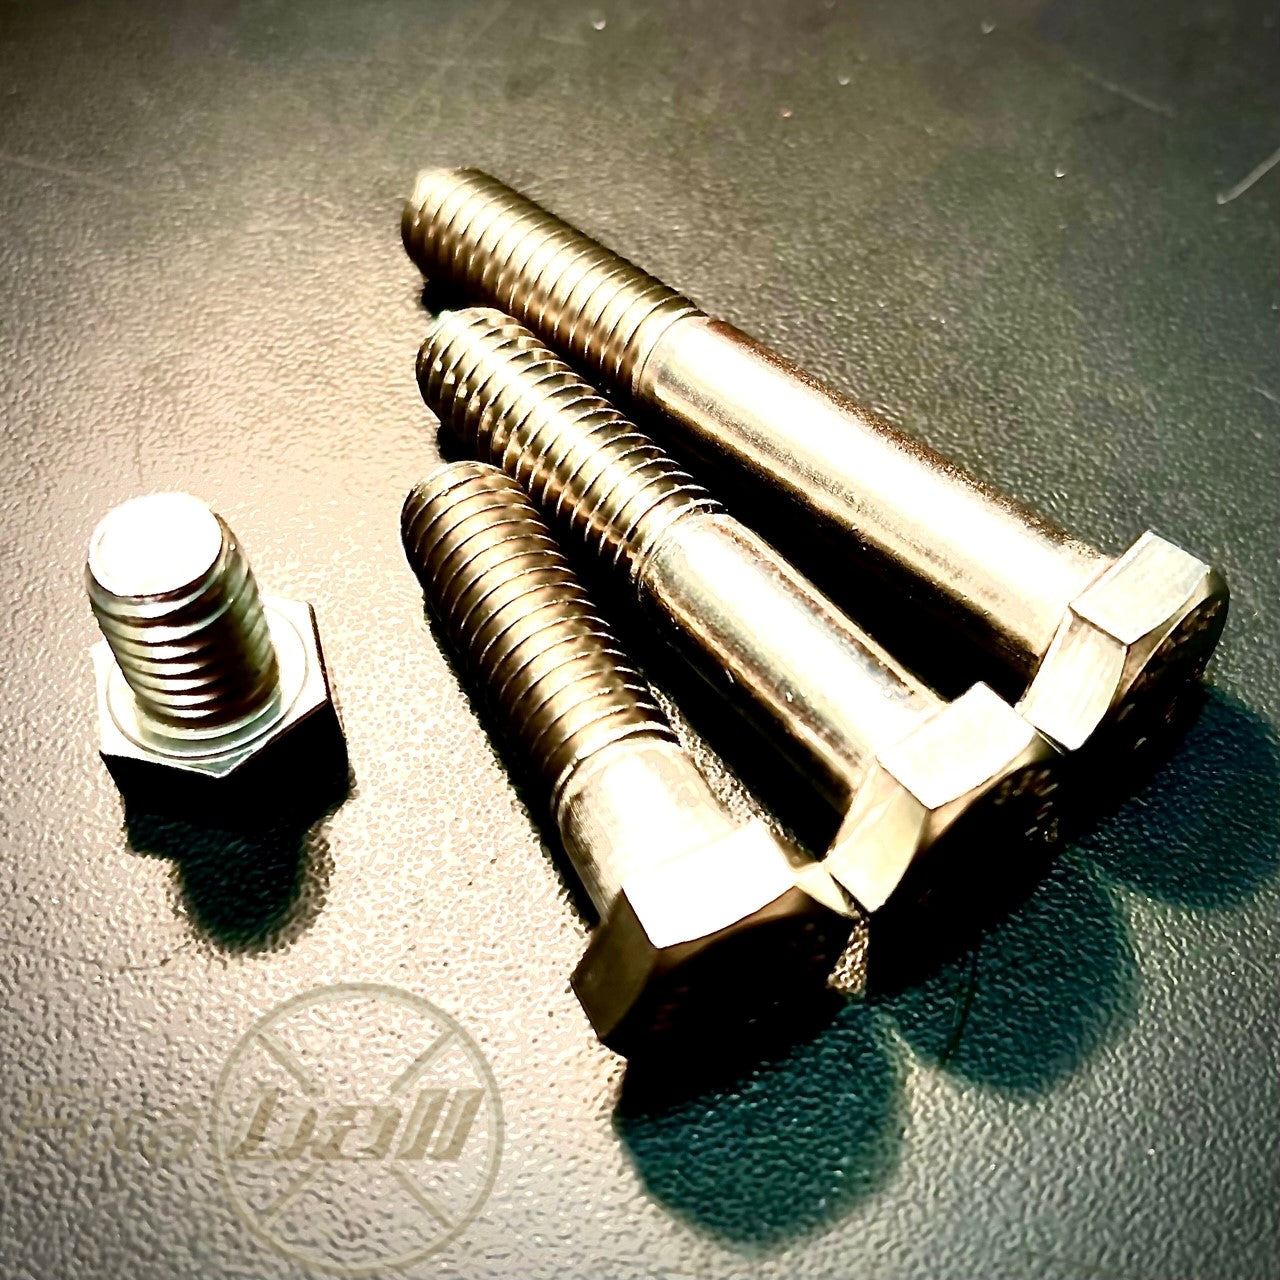 UNC 1/4", Hex Bolt and Hex Set Screw, A2/ 304 Stainless Steel, DIN 931. Hex-Bolt UNC 1/4", Hex Bolt and Hex Set Screw, A2/ 304 Stainless Steel, DIN 931. UNC, Hex-Bolt